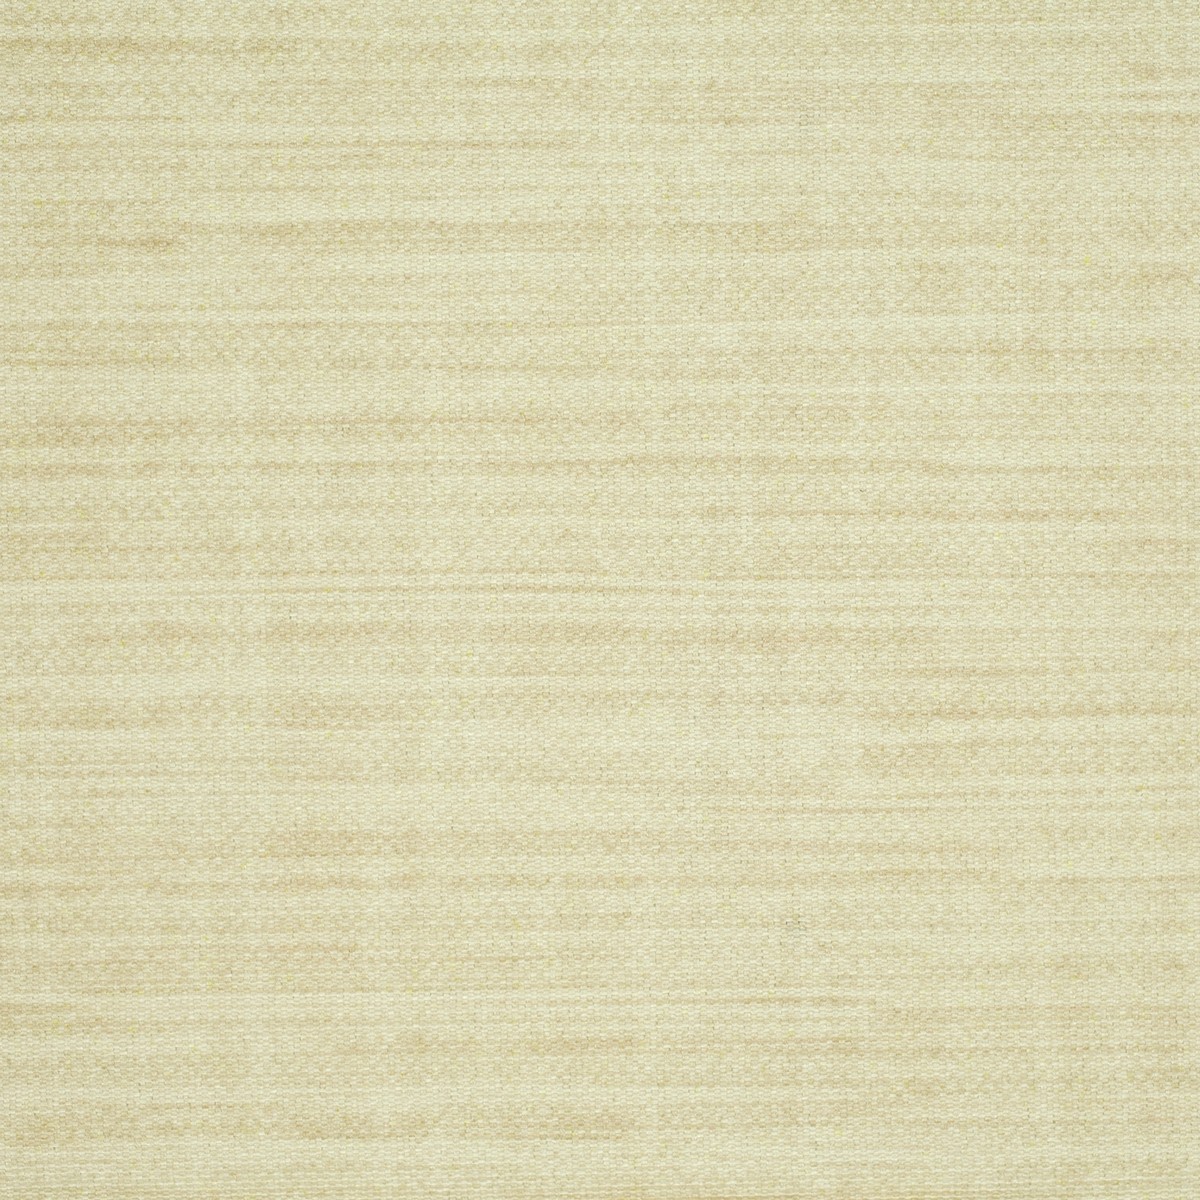 Safi Buttermilk Fabric by Harlequin